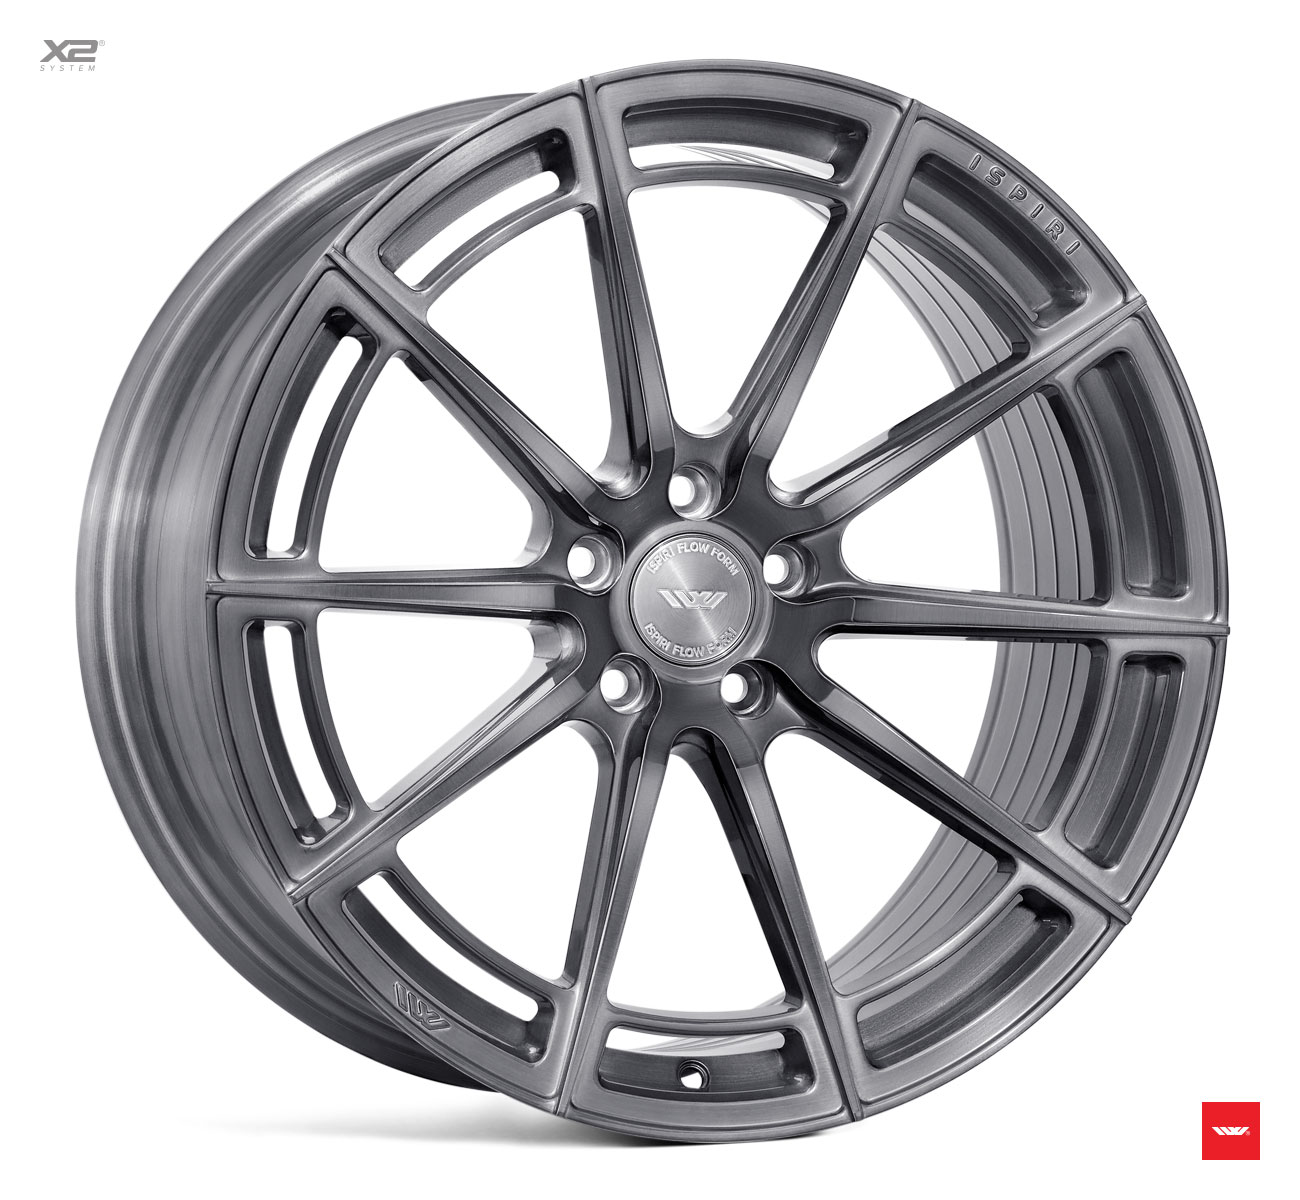 NEW 20  ISPIRI FFR2 MULTI SPOKE ALLOY WHEELS IN FULL BRUSHED CARBON TITANIUM   DEEP CONCAVE 10 5  ALL ROUND